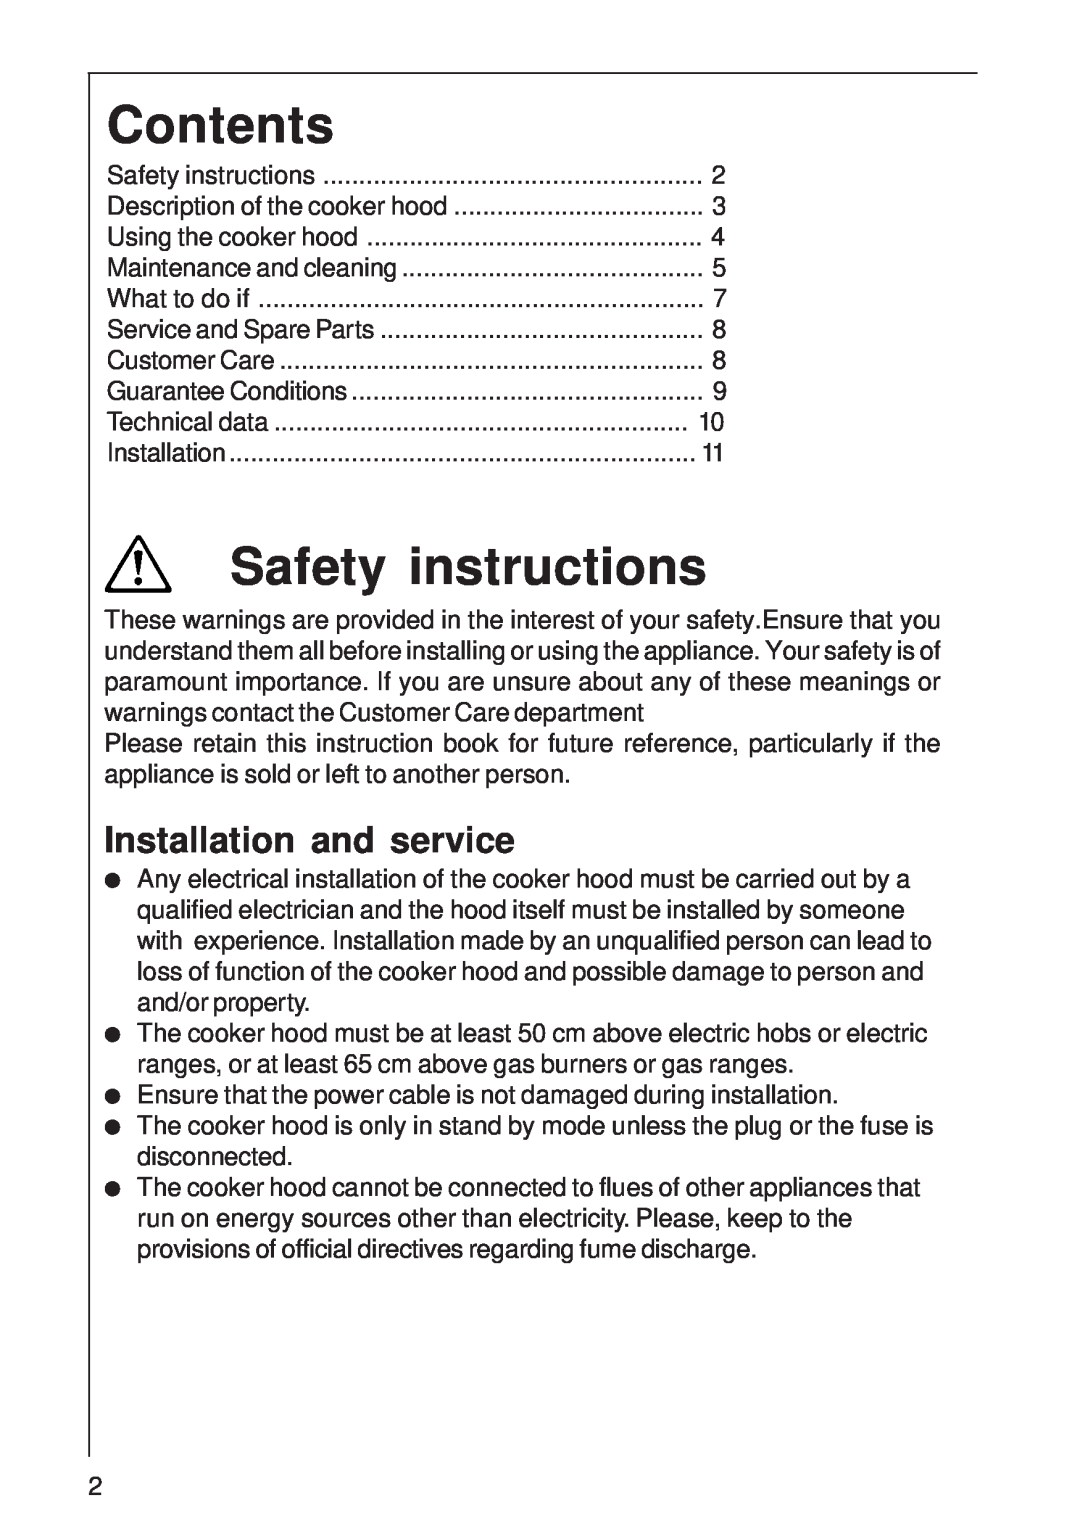 AEG 8160 D installation instructions Installation and service, Contents, Safety instructions 